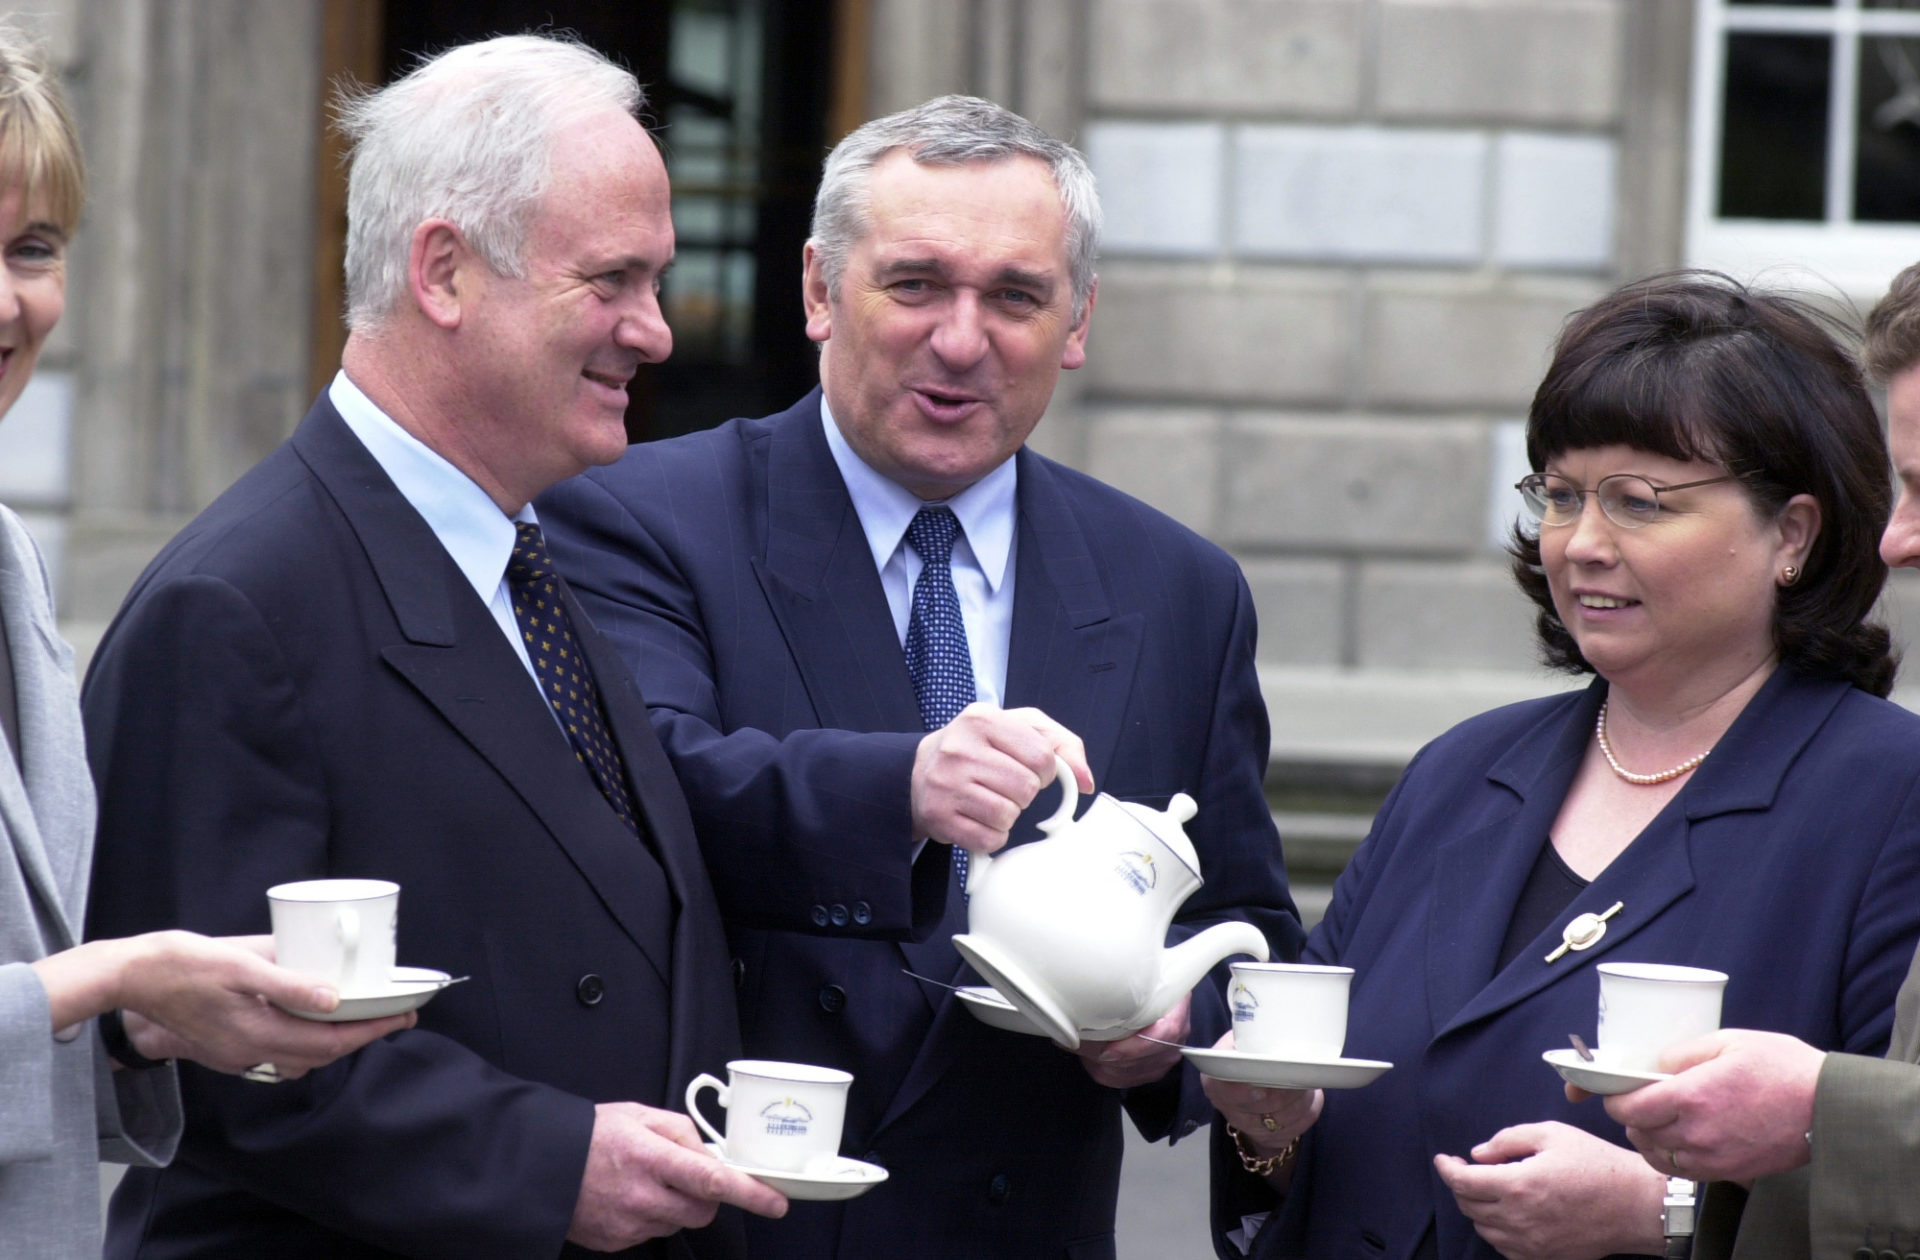 Bertie Ahern and Mary Harney enjoy a cup of tea wit John Bruton outside the Dáil, 2000 Image: Paul Sharp/RollingNews.ie